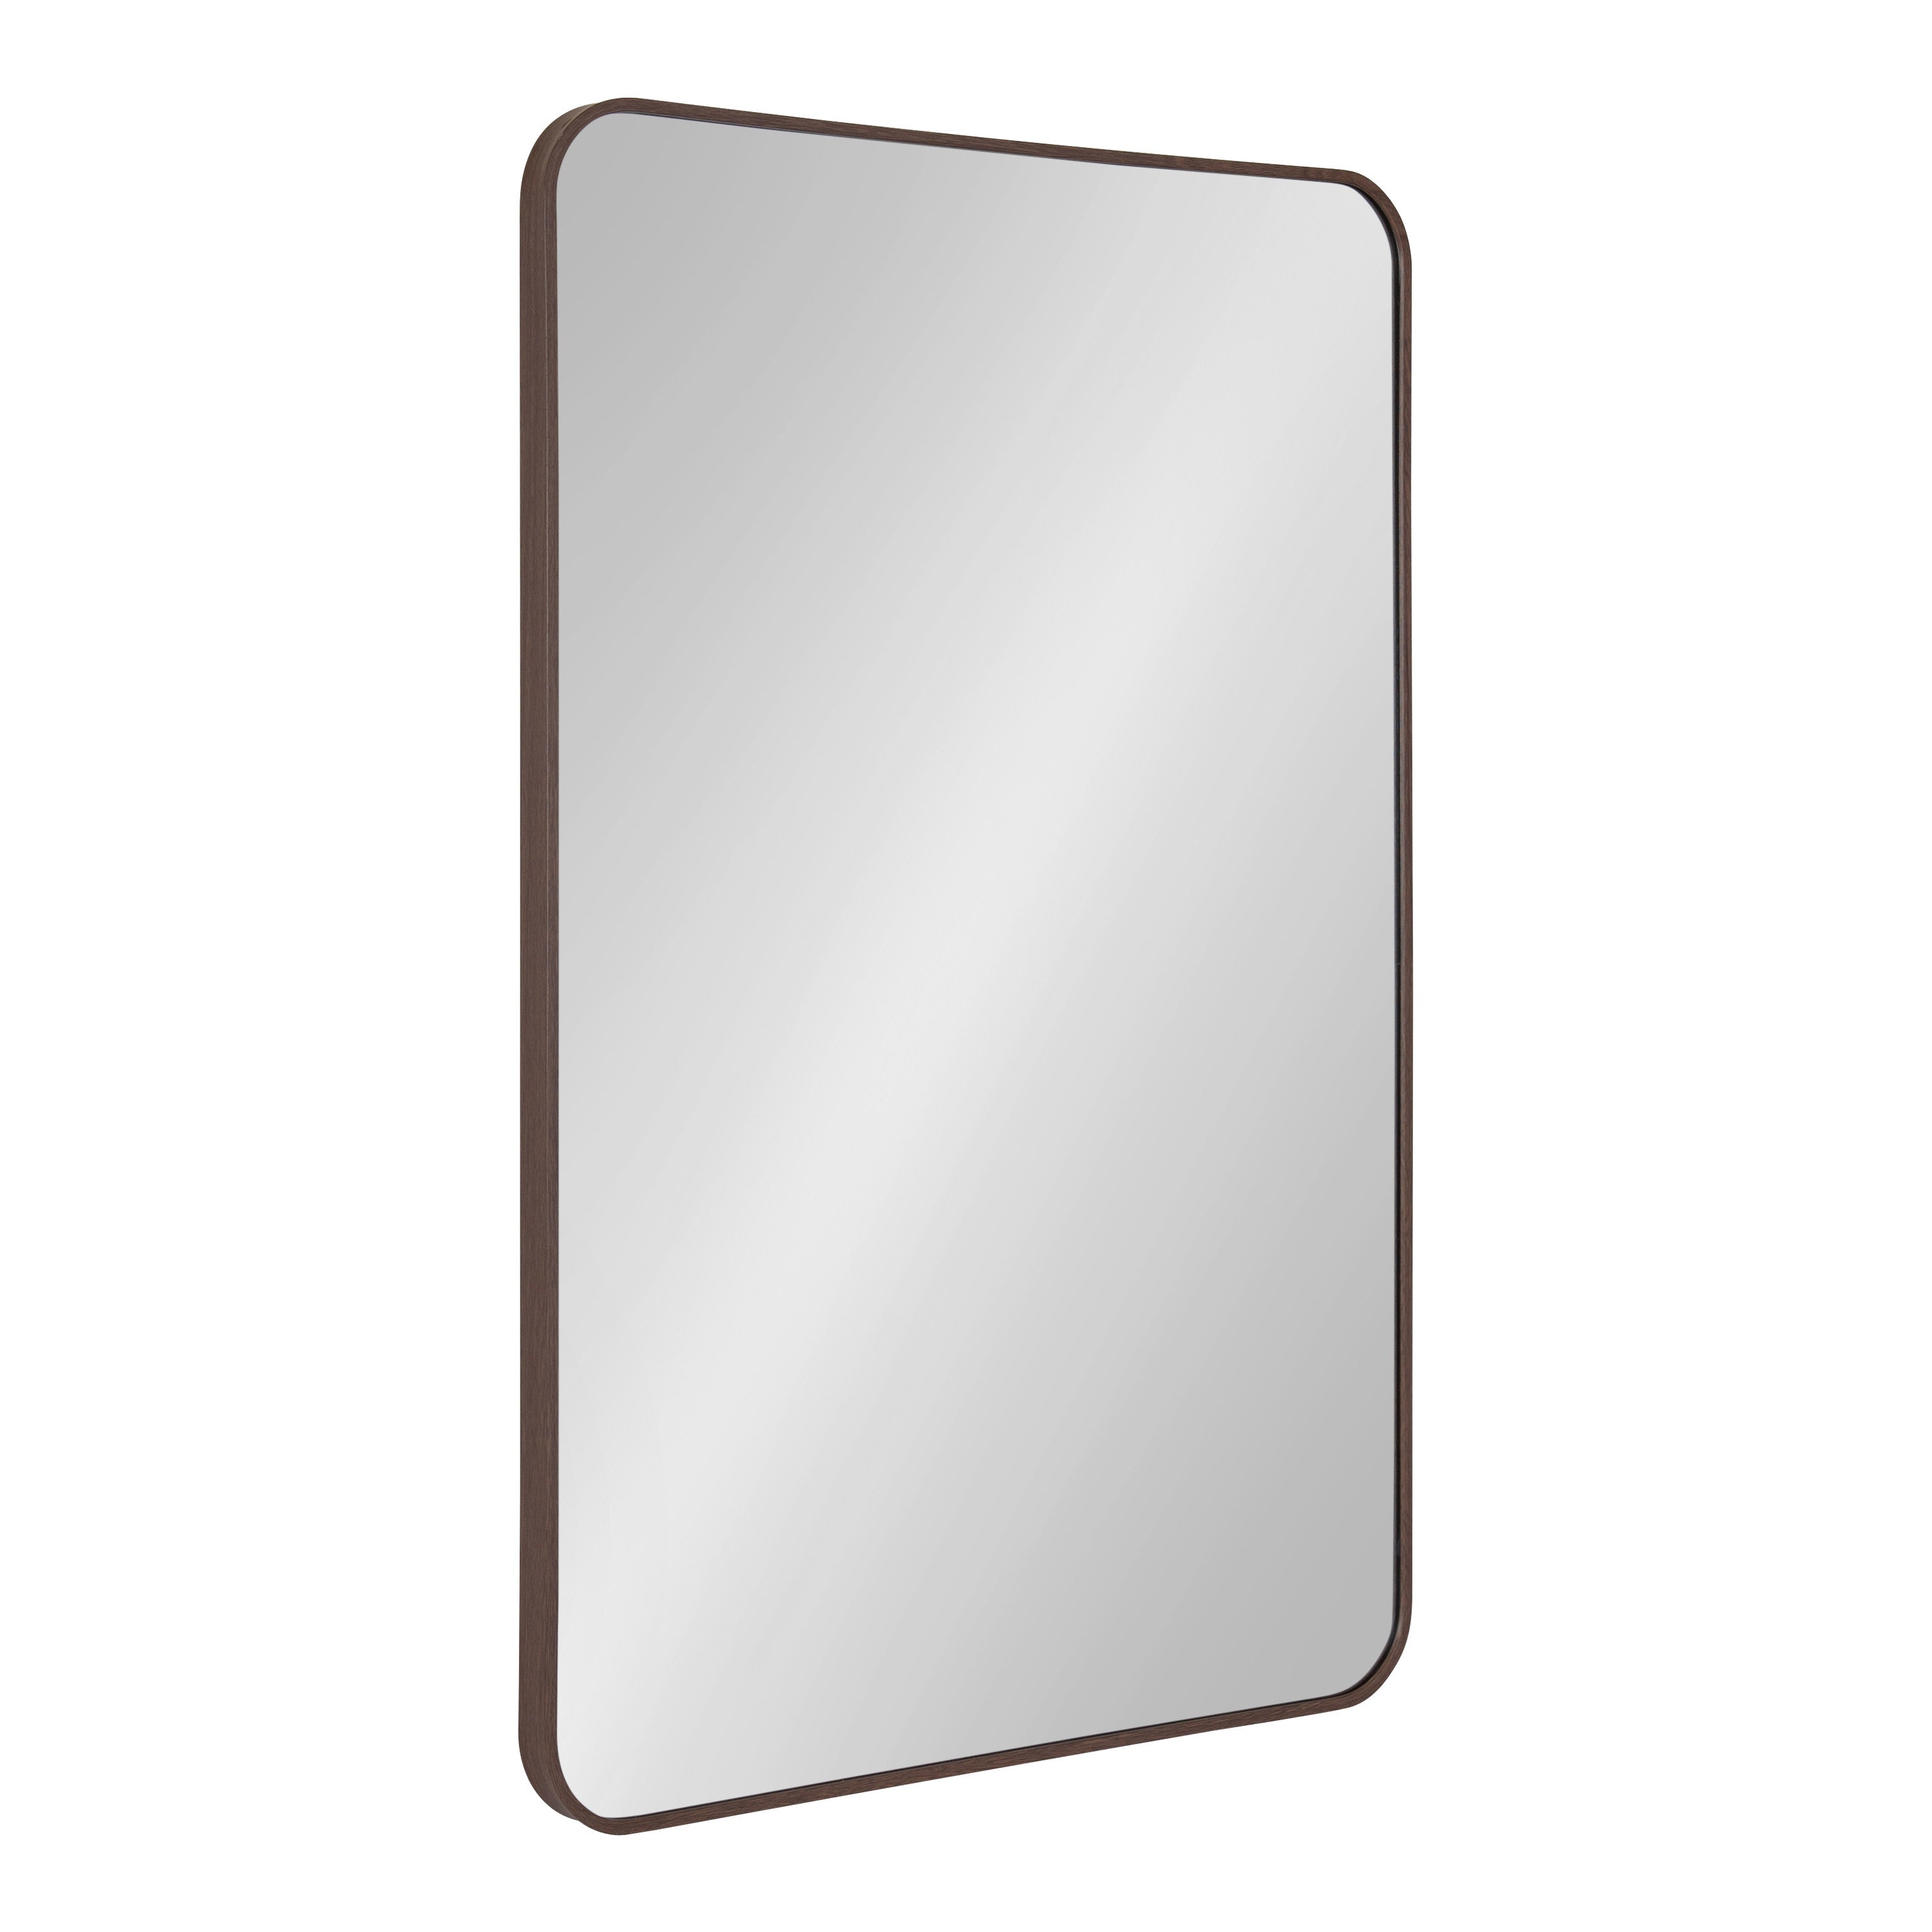 Kate and Laurel Zayda Rounded Rectangle Hanging Wall Mirror, 24 x 36 ...